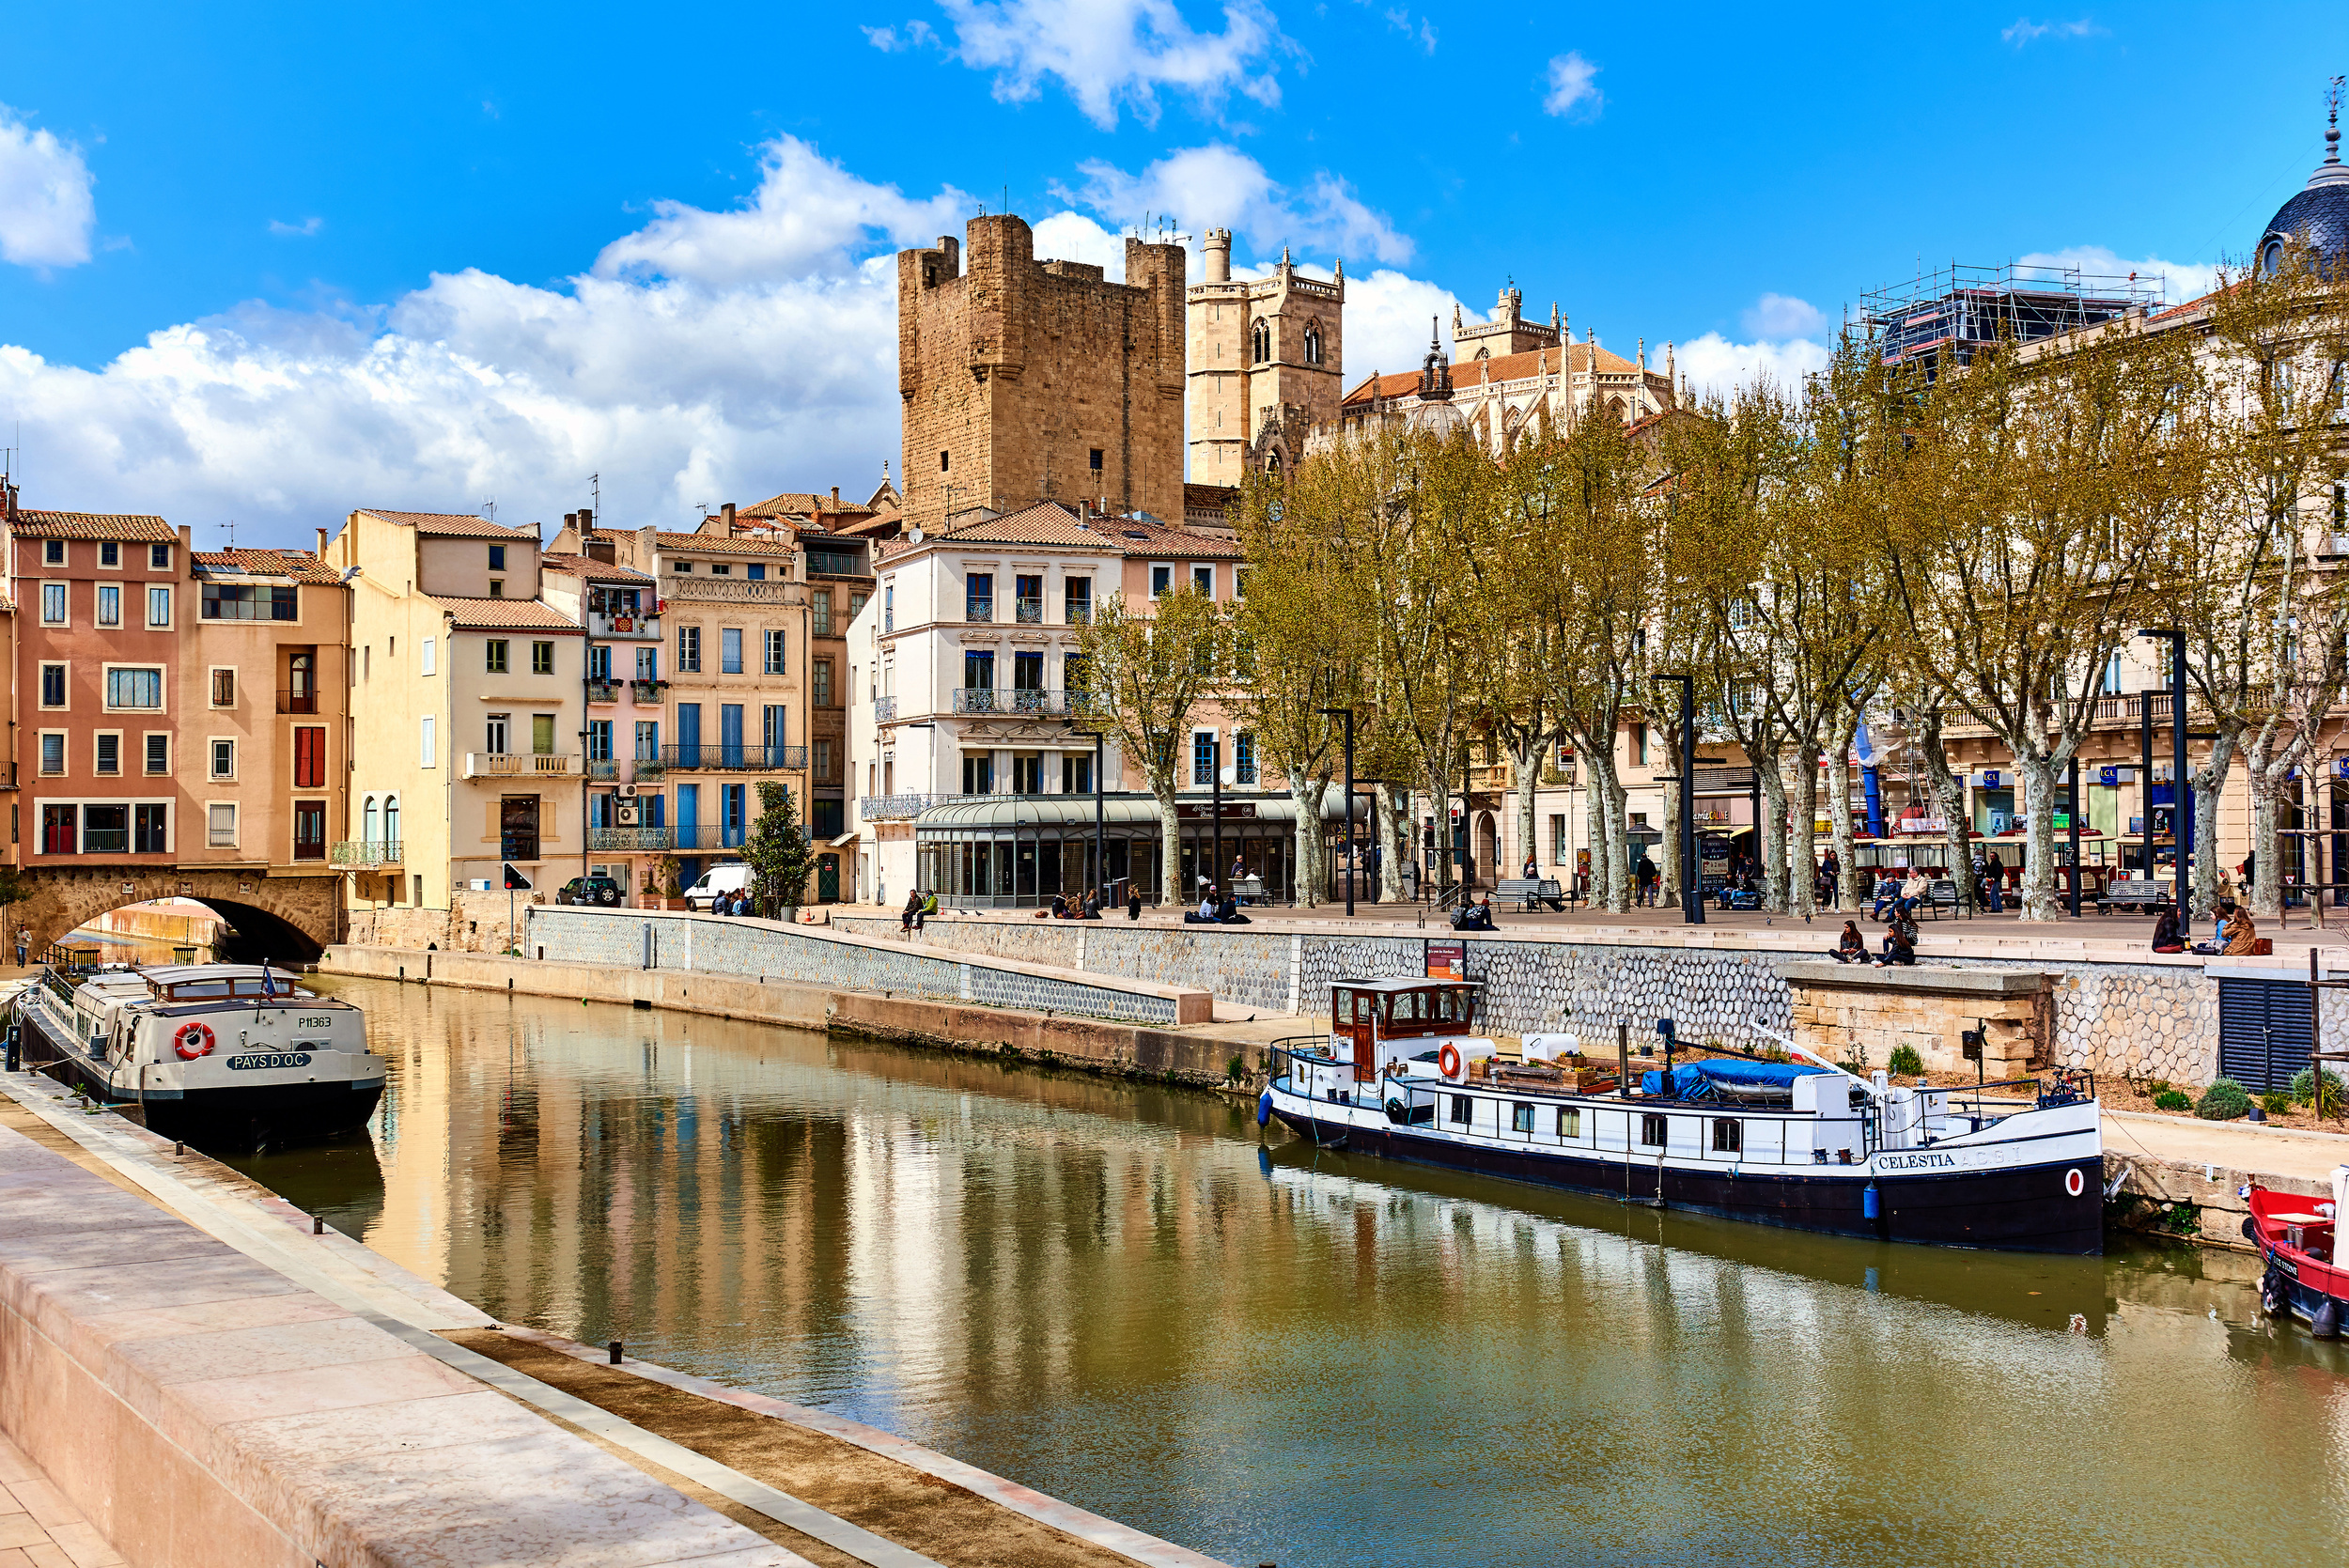 <p>Often overlooked in favor of towns further east along the Mediterranean, Narbonne is perfect for those seeking a quieter destination. It's full of amazing art and archeology museums.</p><p>You may also like: <a href='https://www.yardbarker.com/lifestyle/articles/20_diy_projects_that_will_make_your_life_much_easier_031324/s1__37736139'>20 DIY projects that will make your life much easier</a></p>